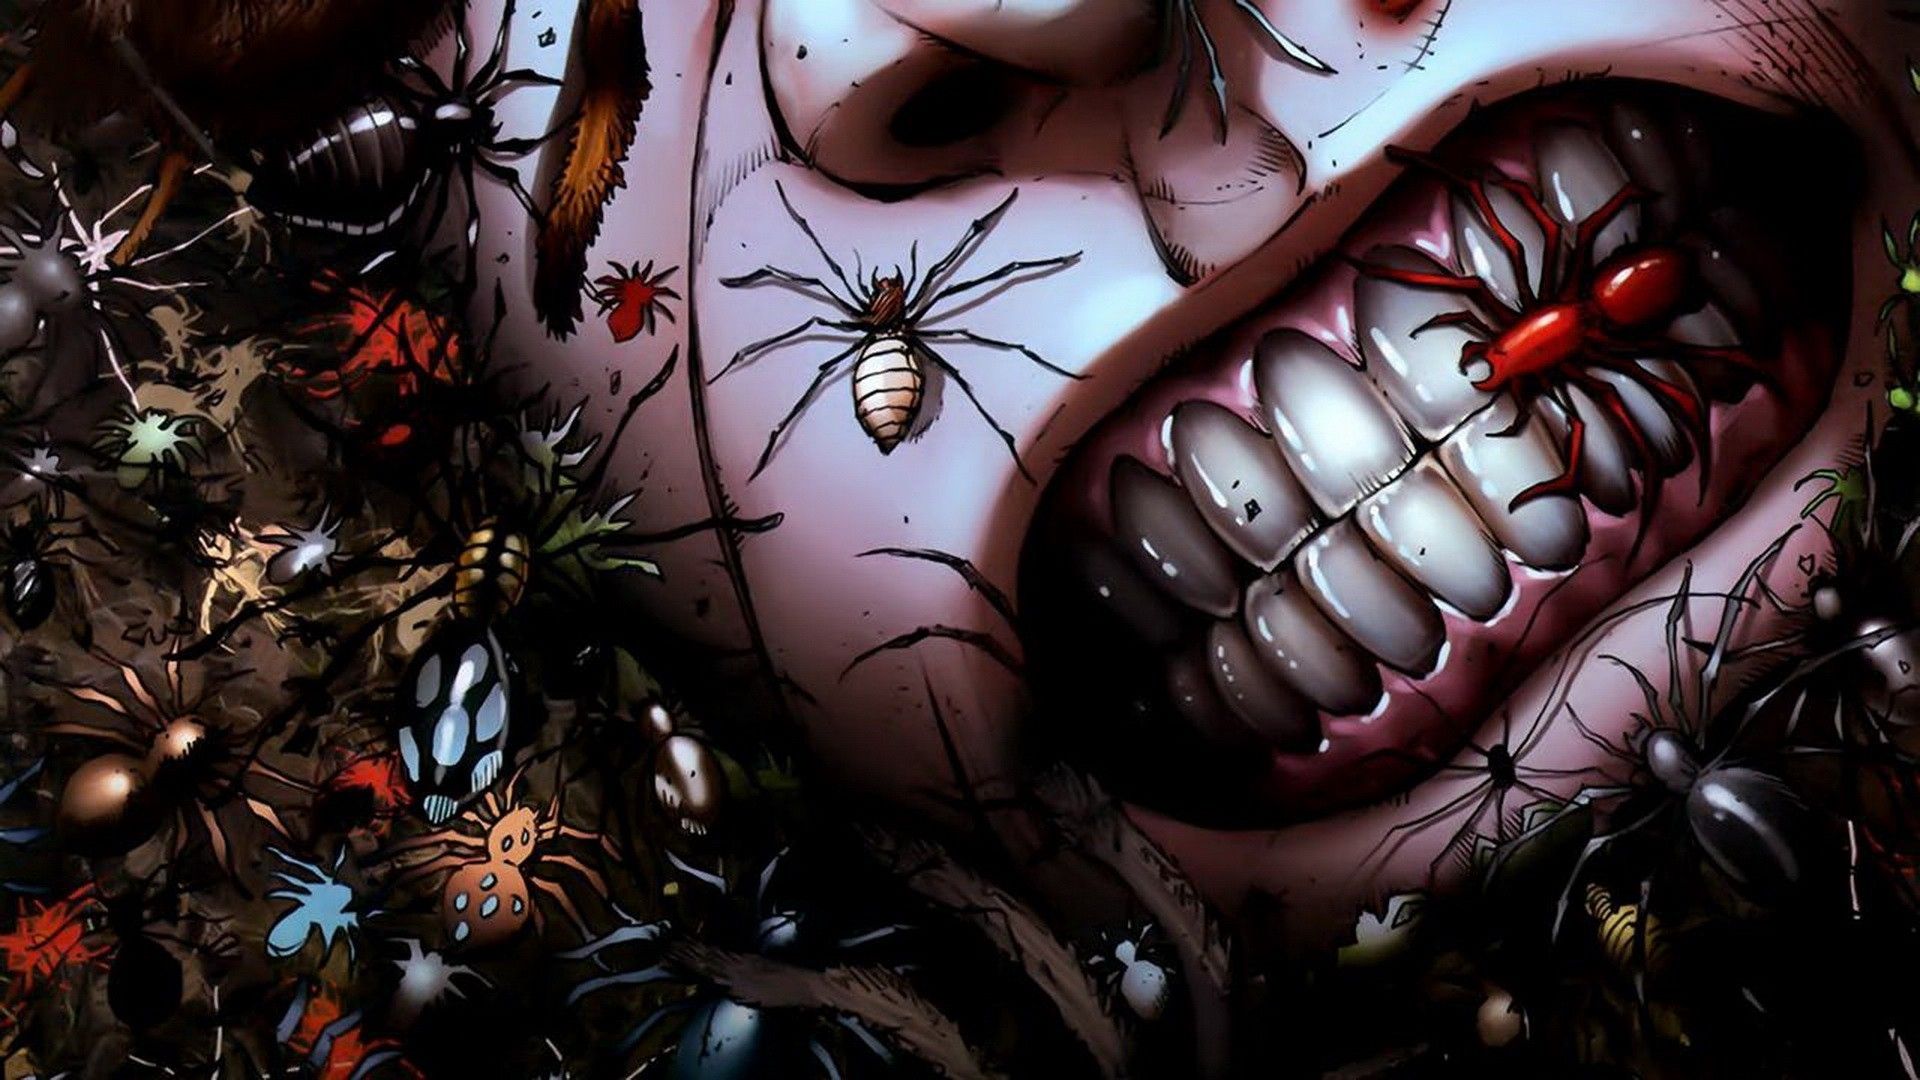 grimm fairy tales, Comics, Anime, Dark, Horror, Insects, Spider, Grimace, Gross, Spooky, Creepy, Scary Wallpaper HD / Desktop and Mobile Background